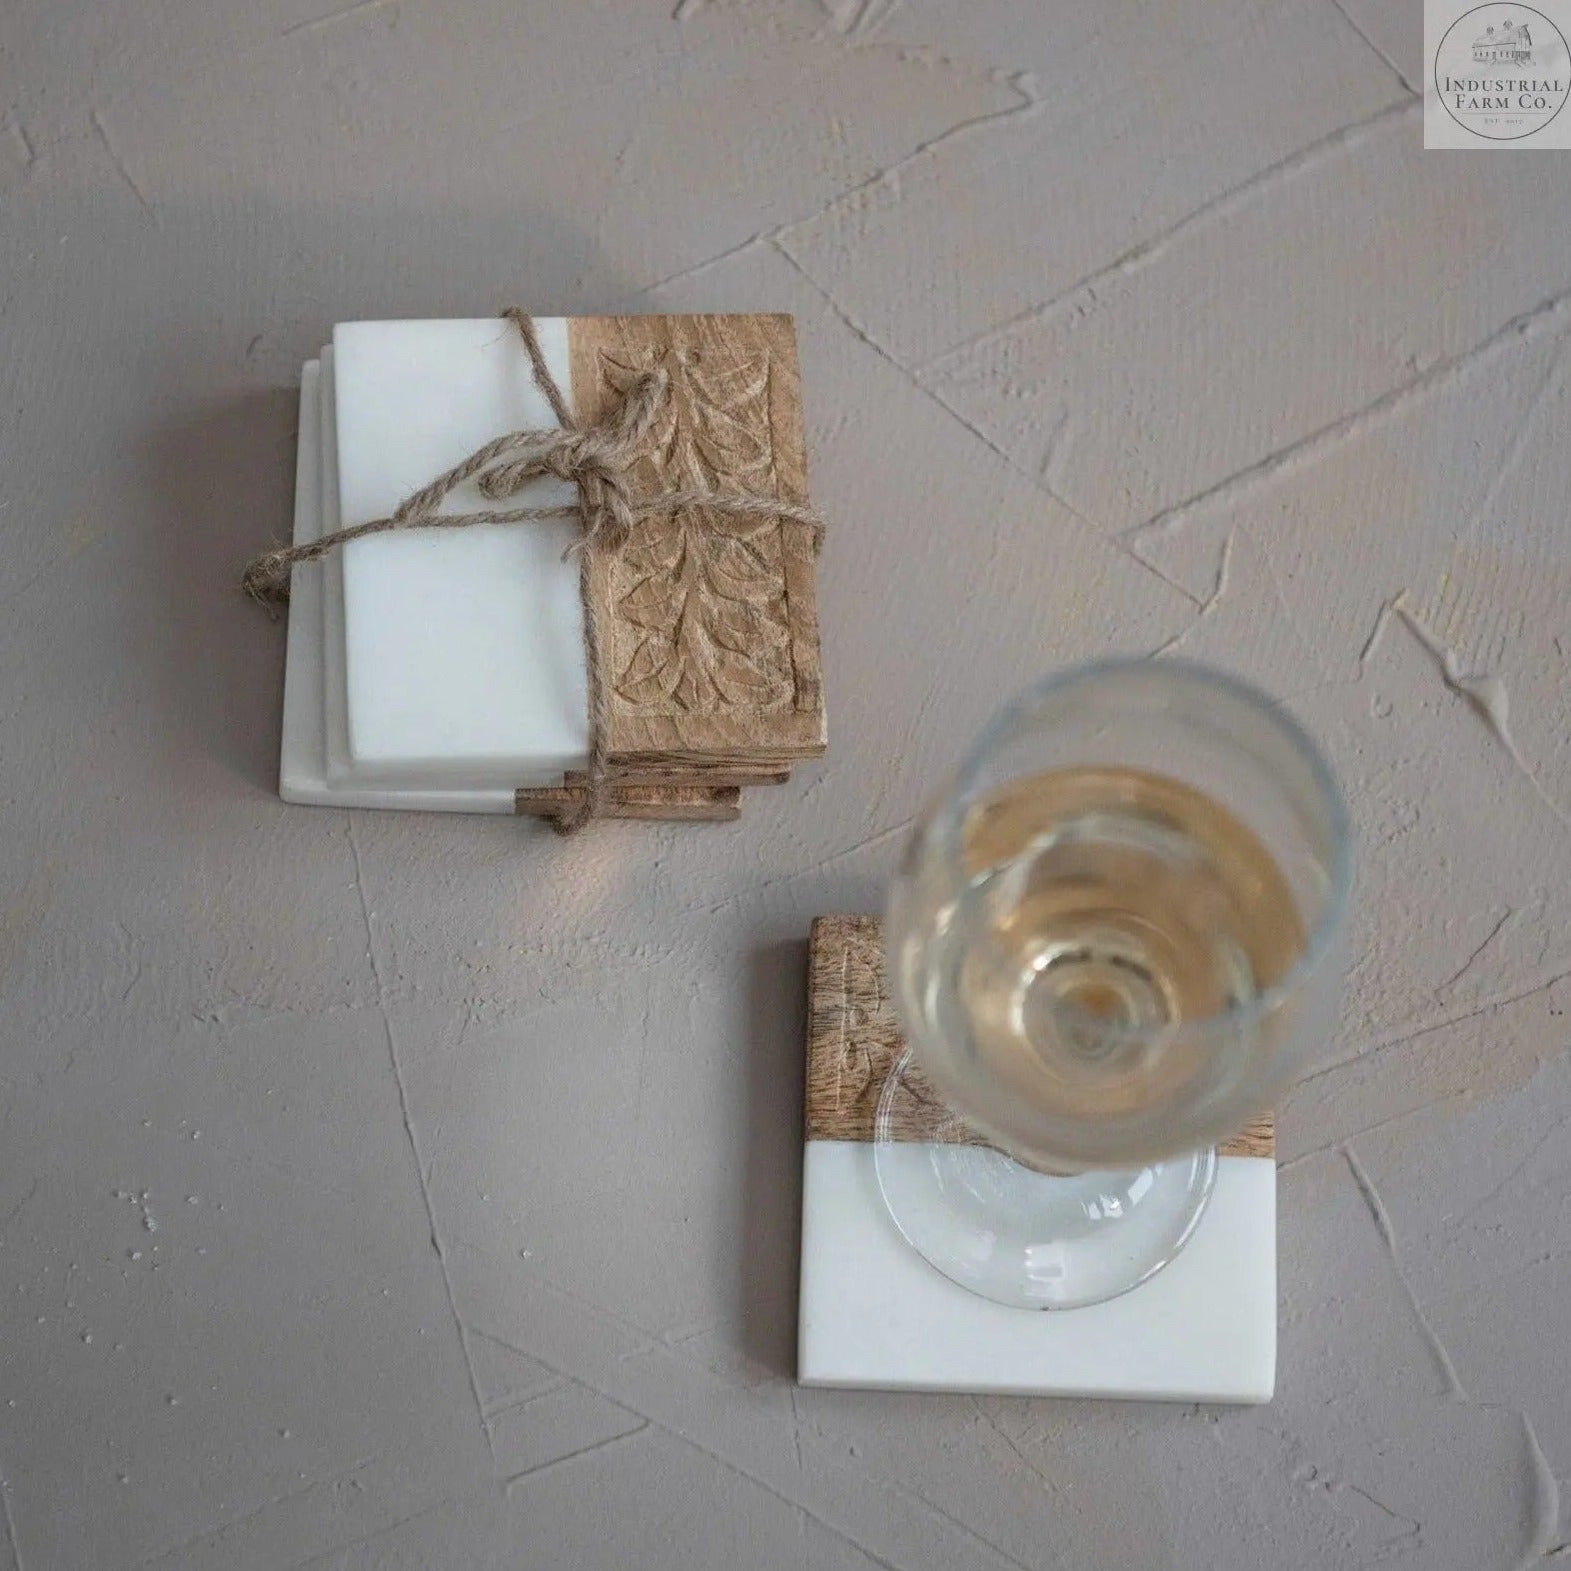 Hand Carved Coaster Set     | Industrial Farm Co